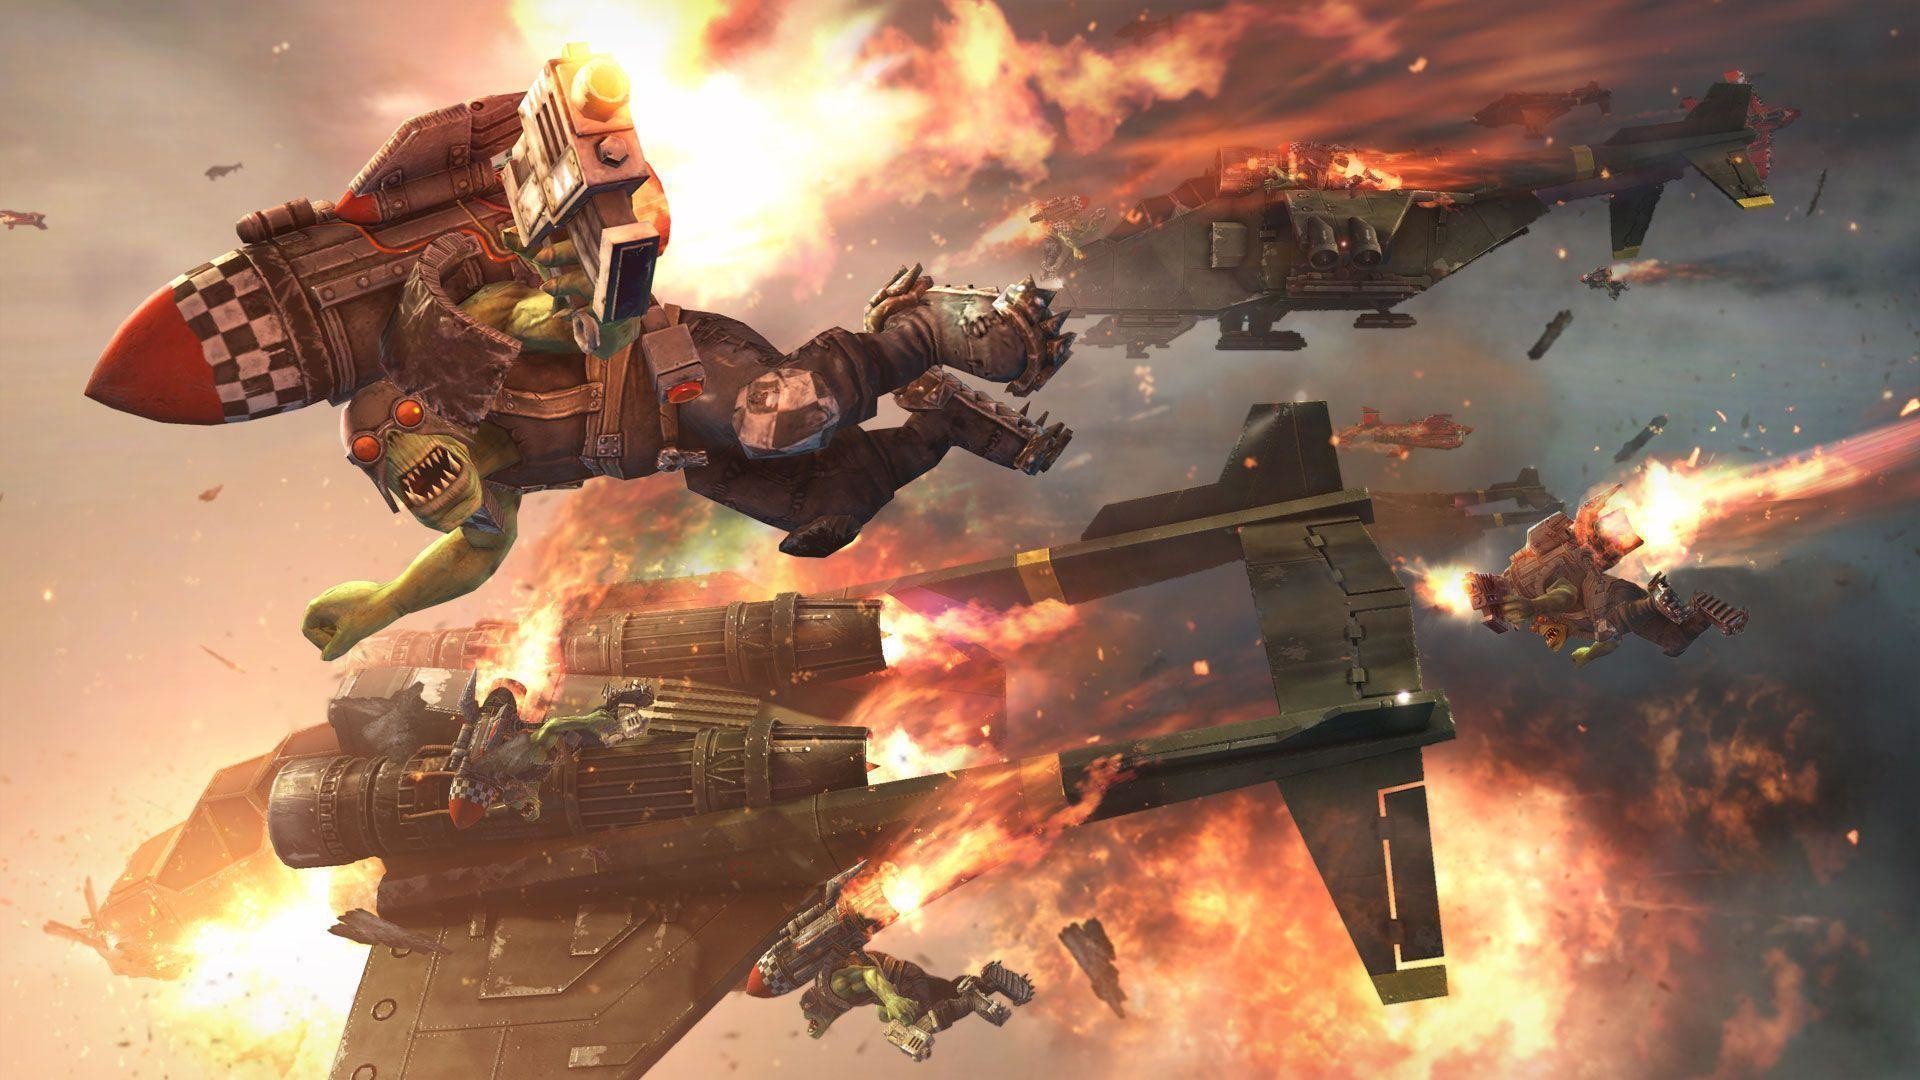 1920x1080 Space Marines And Imperial Guard Vs <b>Orks wallpaper</b> |